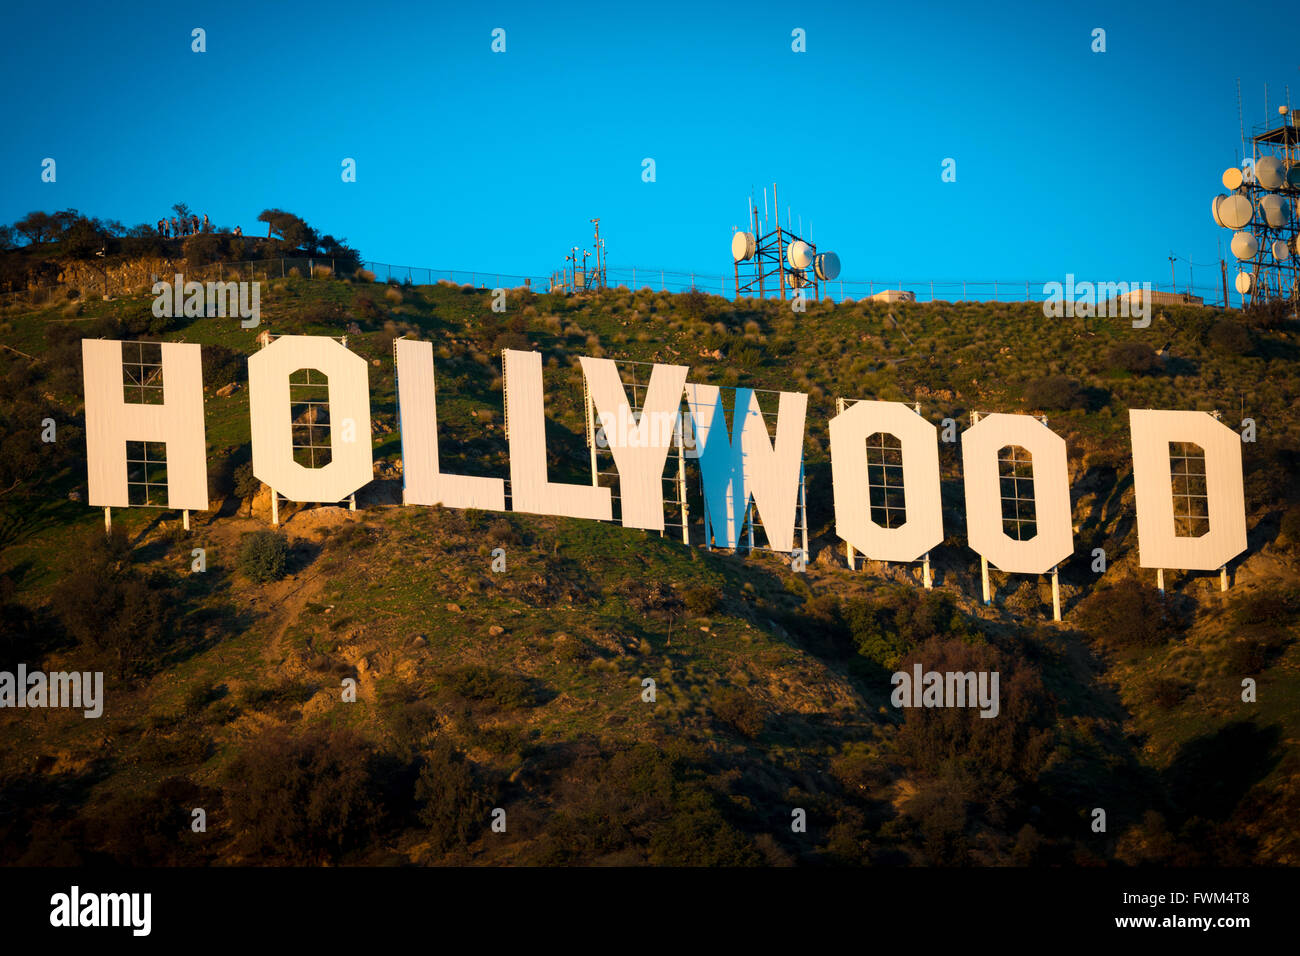 The famous Hollywood sign in Los Angeles California, USA. Stock Photo